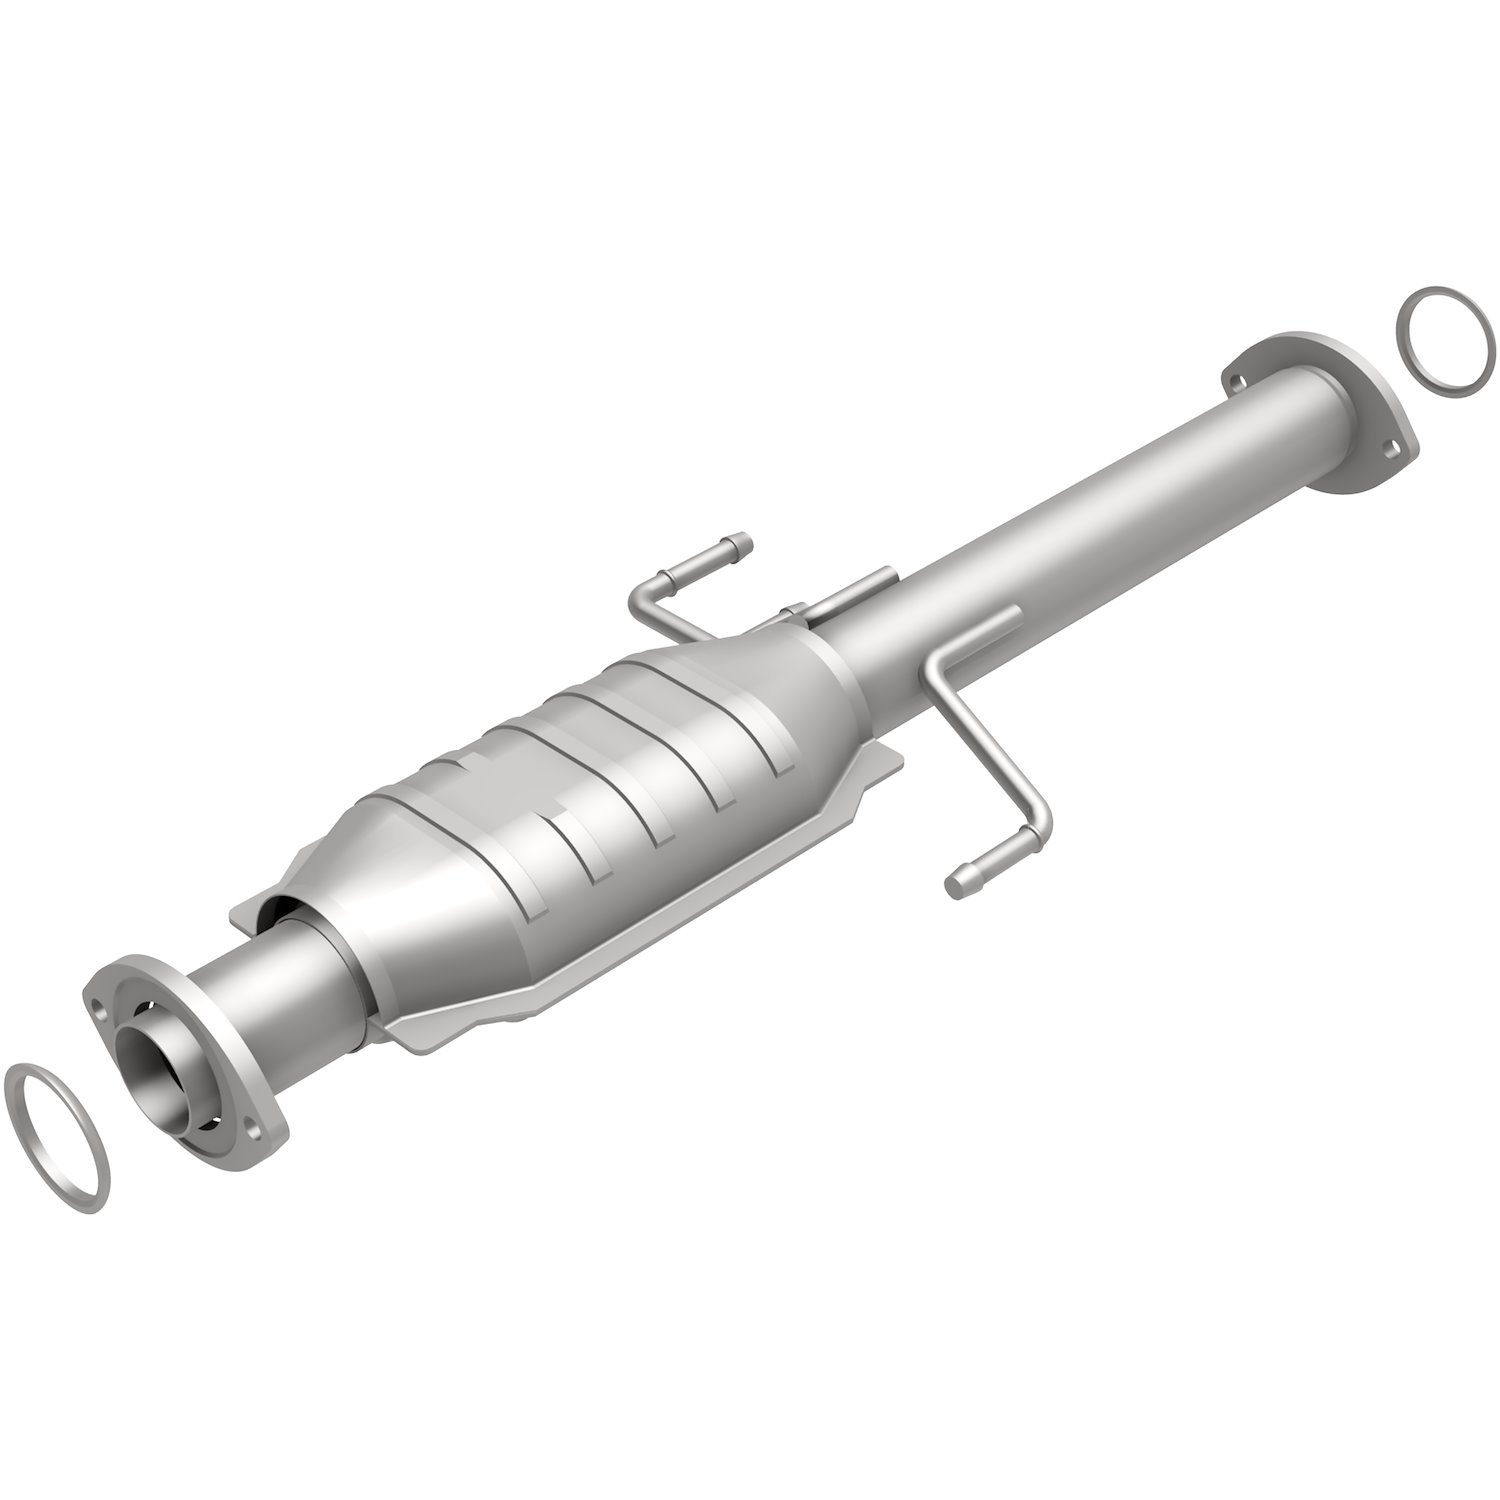 Direct-Fit Catalytic Converter 2002-04 Tacoma 3.4L with LEV (Rear)